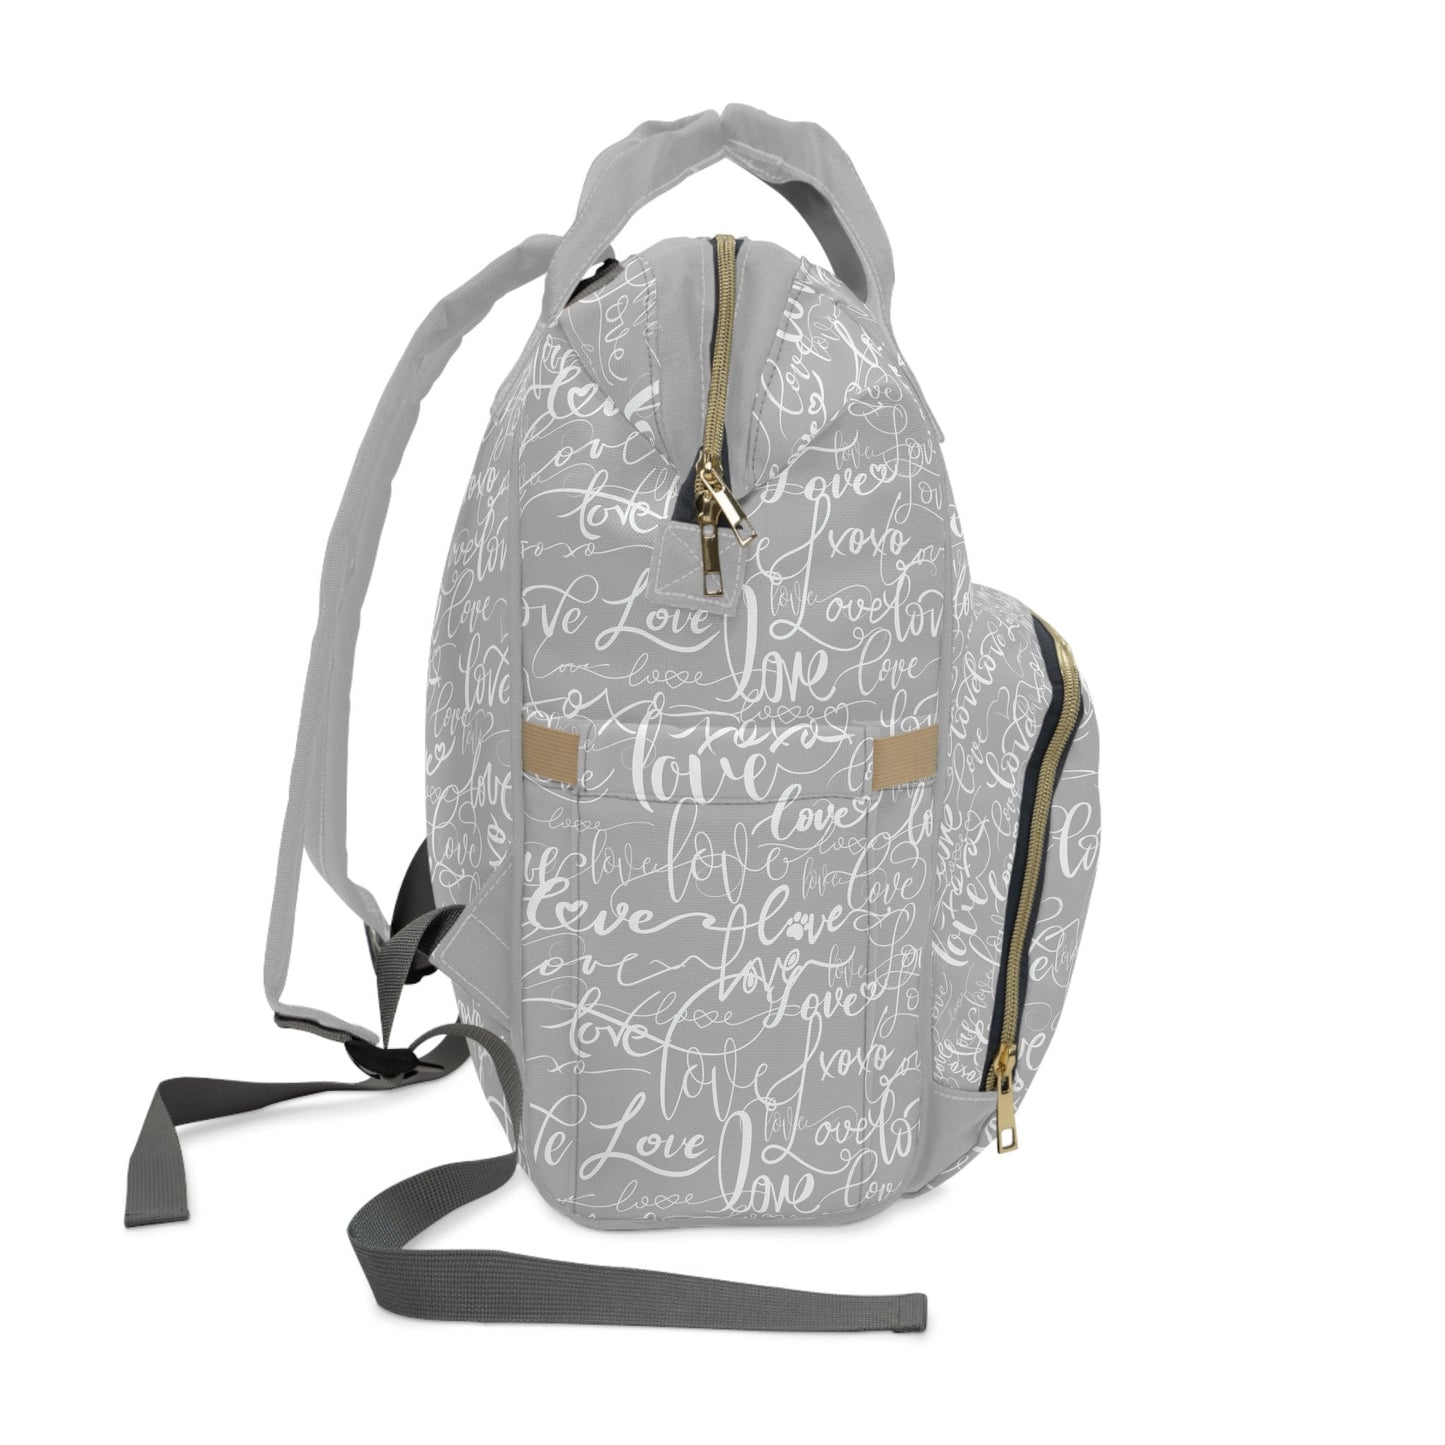 Trendy Stylish Backpack Diaper Bag/Love All Over Print/Unique Design/ Woman&#39;s Weekend Bag/Multifunctional Diaper Bag/Grey & White baby bag